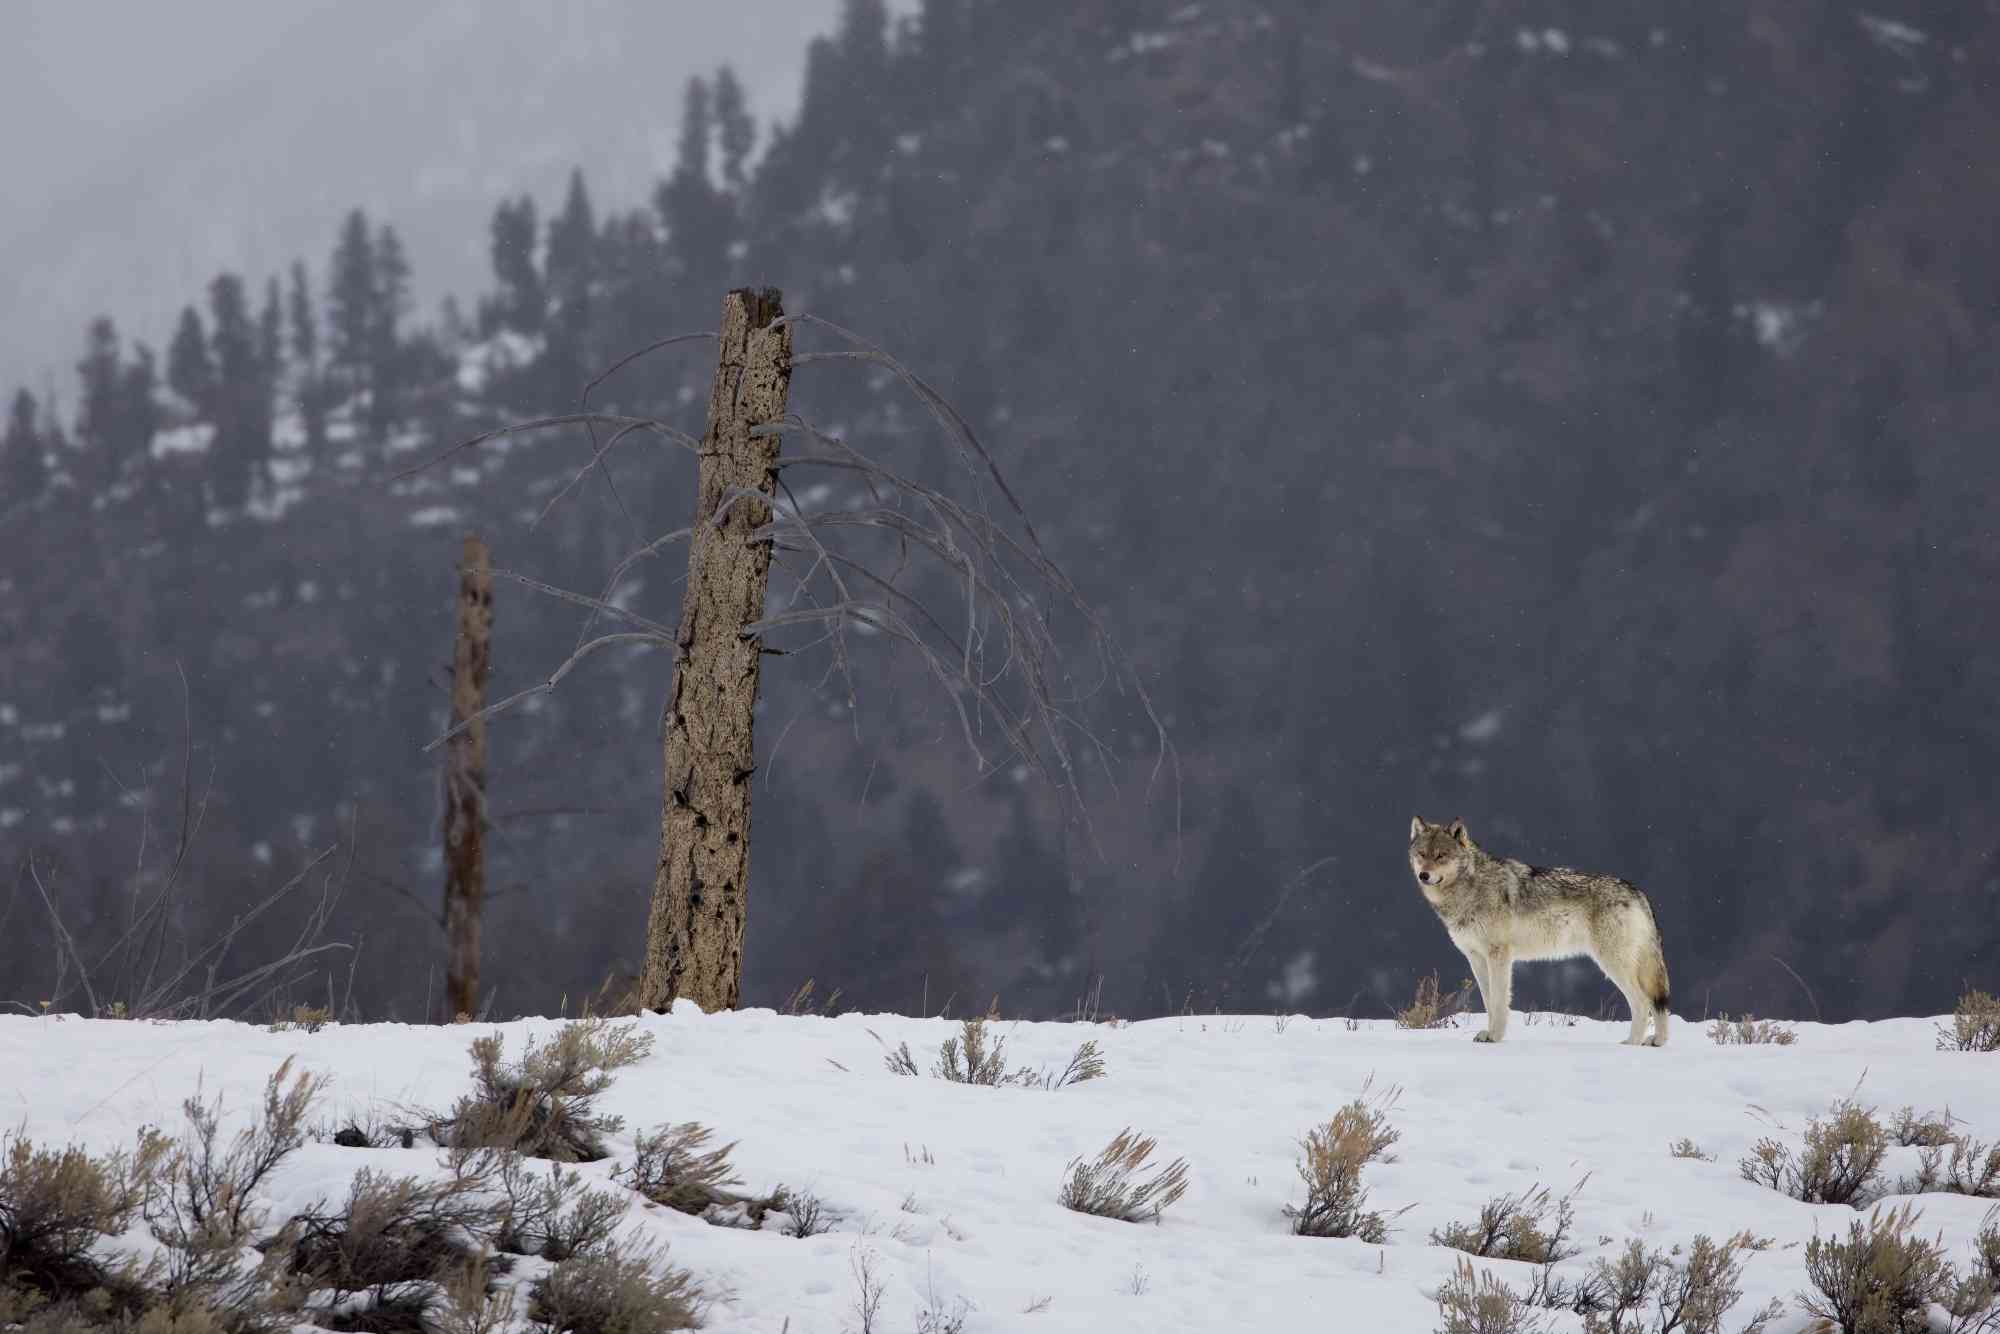 Gray Wolf in Snowy Landscape - Yellowstone National Park - Wyoming